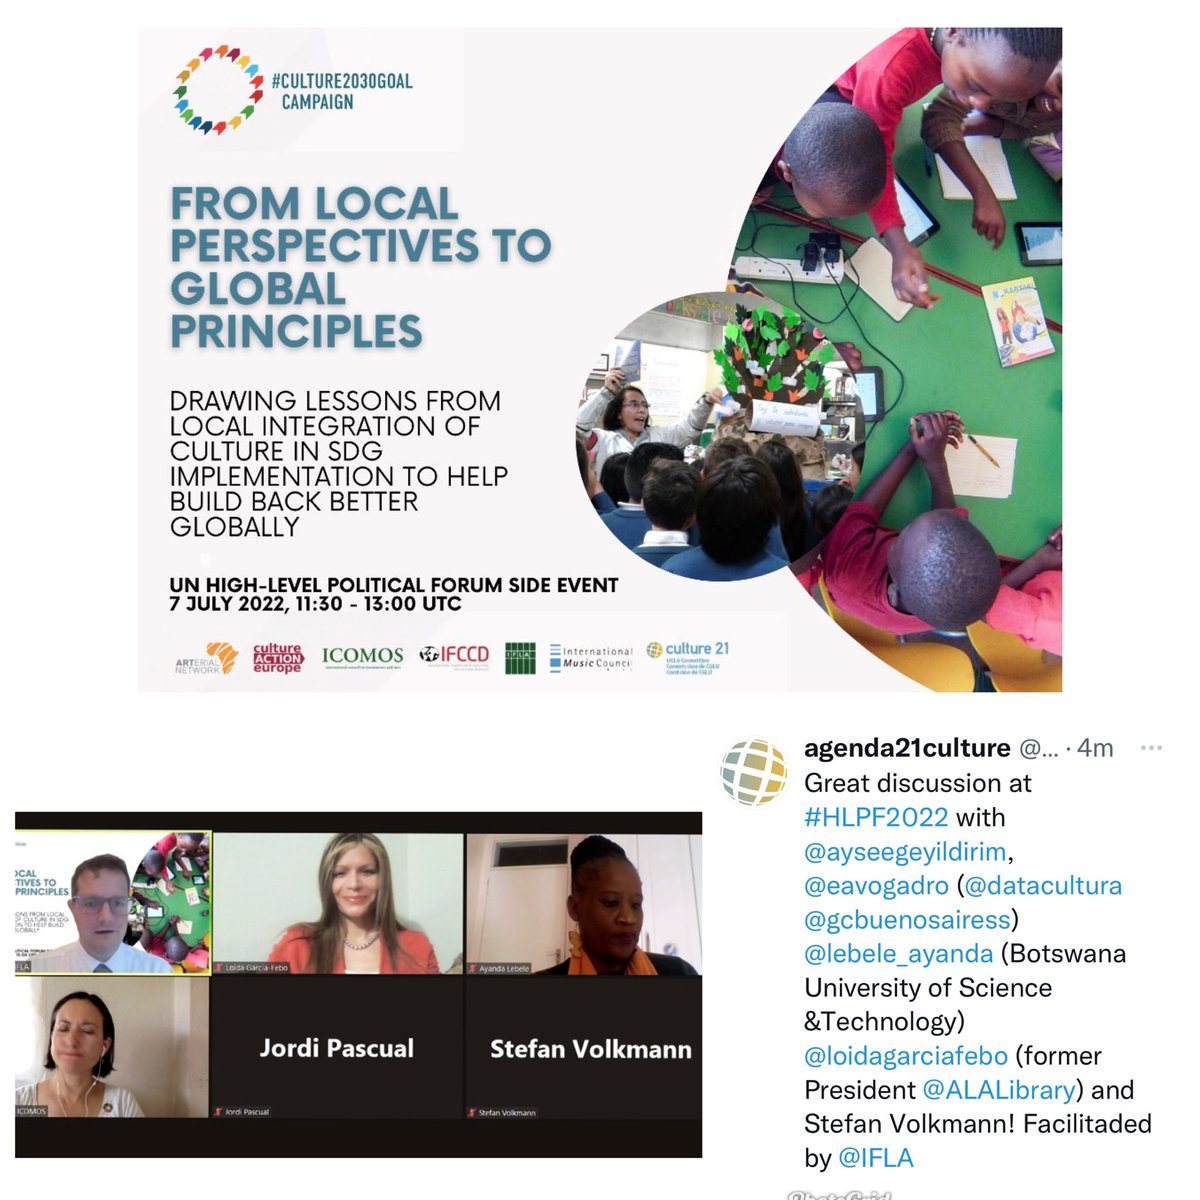 Delighted to share case-studies of libraries as cultural institutions integrated in2 local development strategies @ #HLPF2022 @UN event 'From local perspectives to global principles...' by @culture21 @IFLA  #culture2030goal #SDGs #Agenda2030 
cc: @ALALibrary